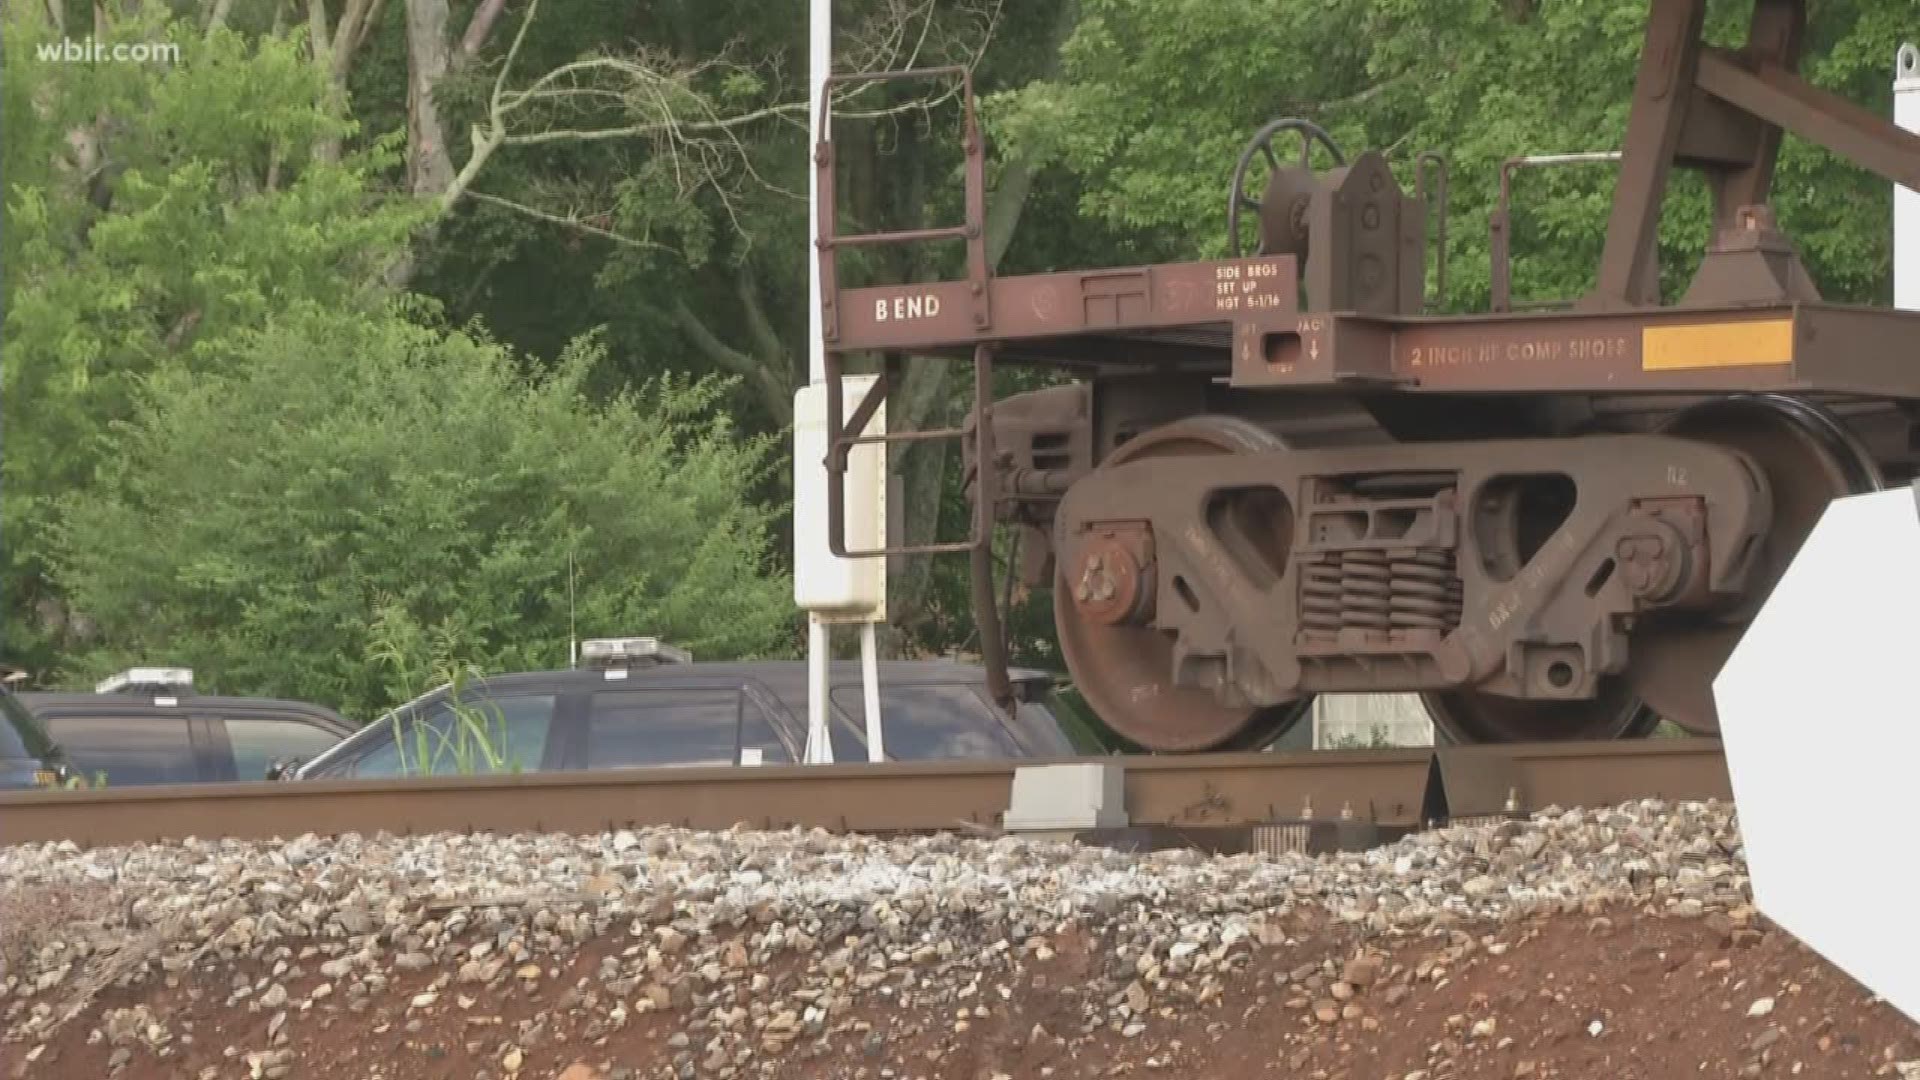 The Tennessee Highway Patrol is investigating a deadly crash involving a train and vehicle Thursday evening, according to NBC Affiliate WRCB.